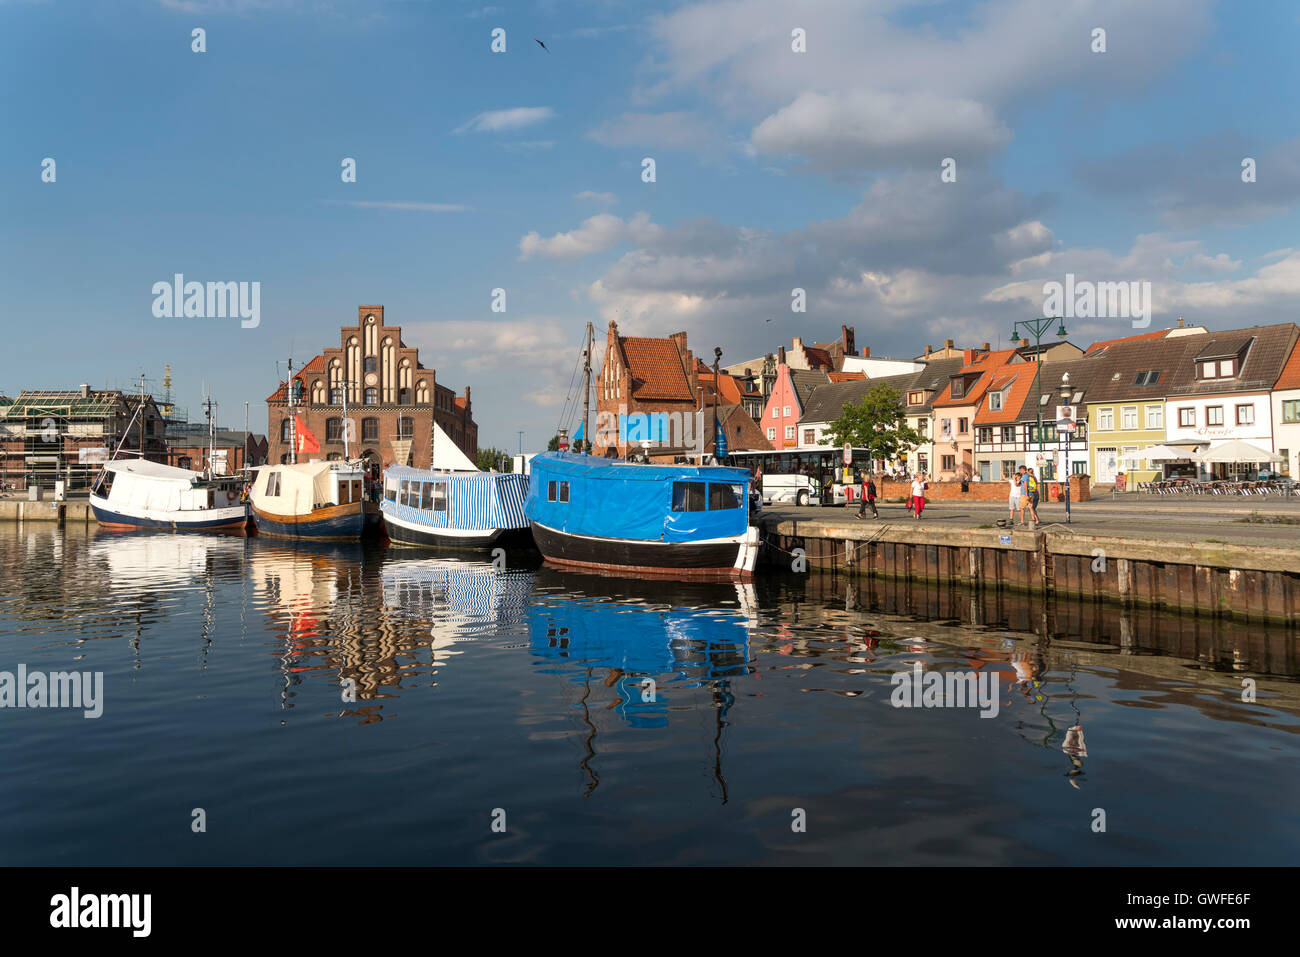 historic Old Harbour, watergate and old customs house, Hanseatic City of Wismar, Mecklenburg-Vorpommern, Germany Stock Photo